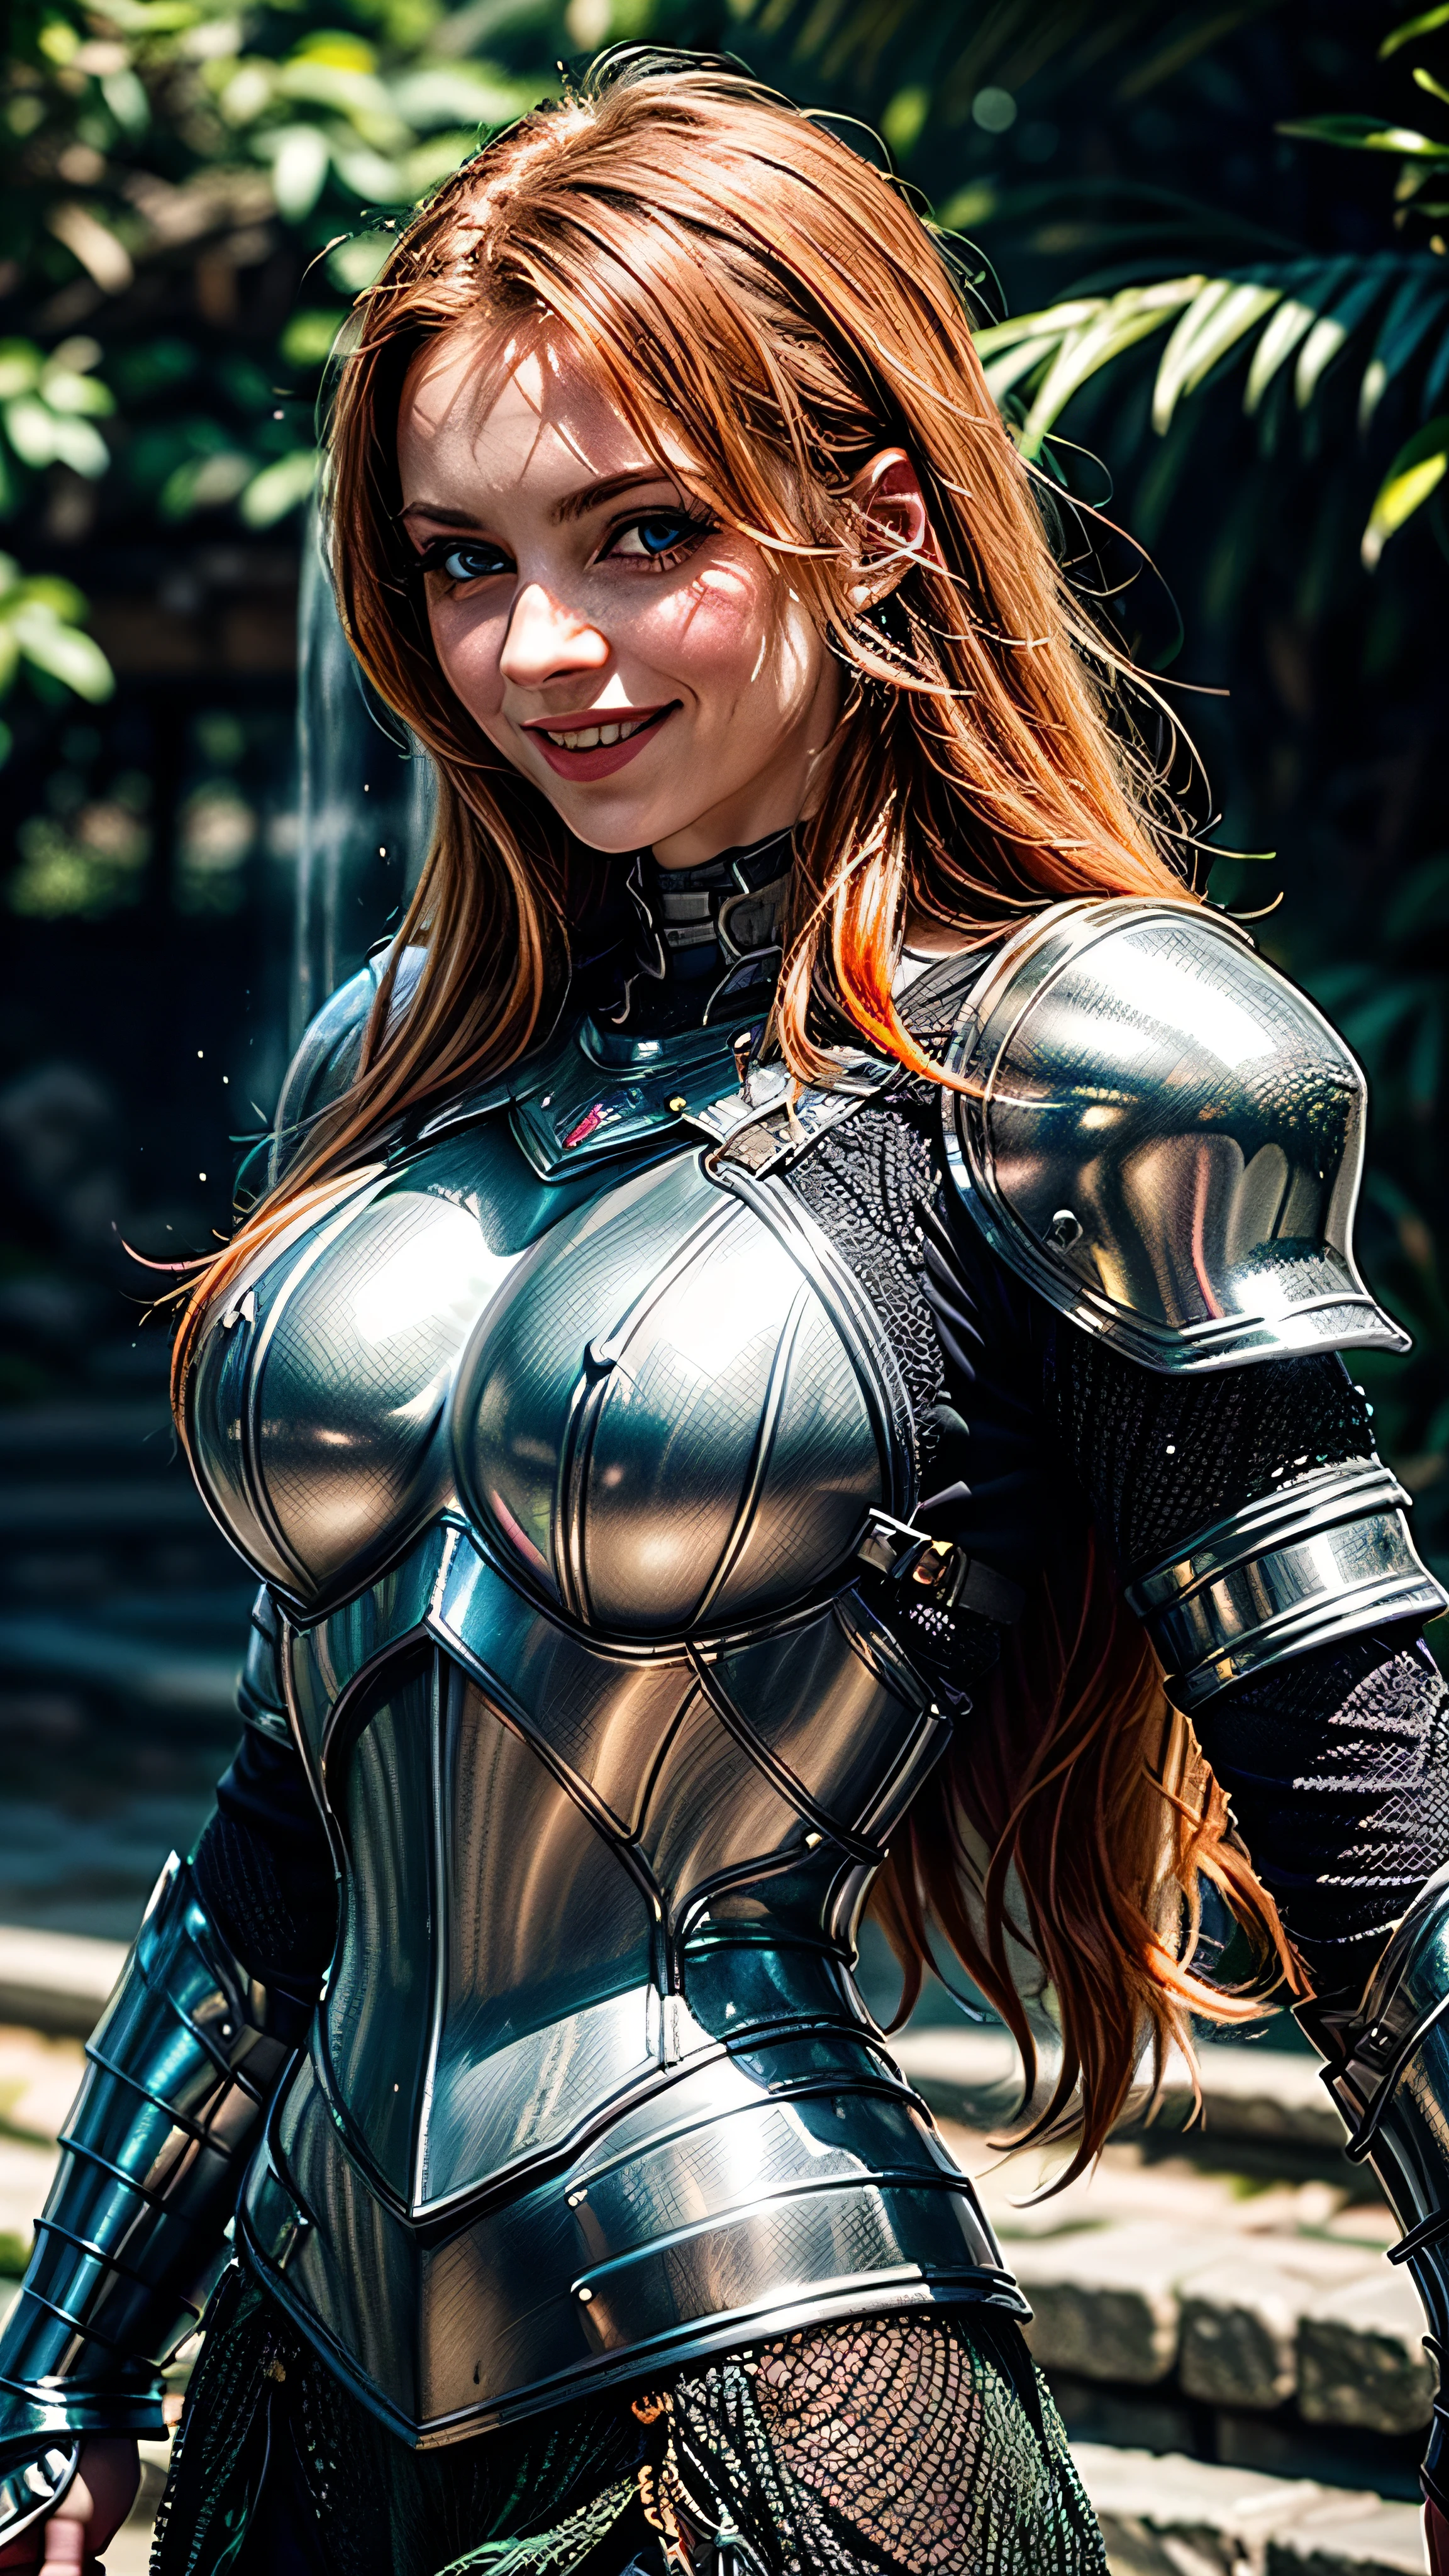 (masterpiece, photorealistic:1.4, extremely intricate:1.3), (photon mapping, radiosity, physically based rendering, ultra resolution, hyper-realistic, photorealistic:1.4, hyper-realistic, 8K), portrait of a muscular girl, ((armor from the late Renaissance, black chrome perfectchainmail armor:0.8, (long eyelashes), clear green eyes, humid, humid, smiling)), metal reflections, upper body, portrait, outdoors, intense sunlight, far away waterfall, tropical, professional photograph of a stunning woman, (long straight bright orange hair, blowing, dynamic pose), sharp focus, dramatic, award winning, cinematic lighting, (film grain, bokeh, interaction)
